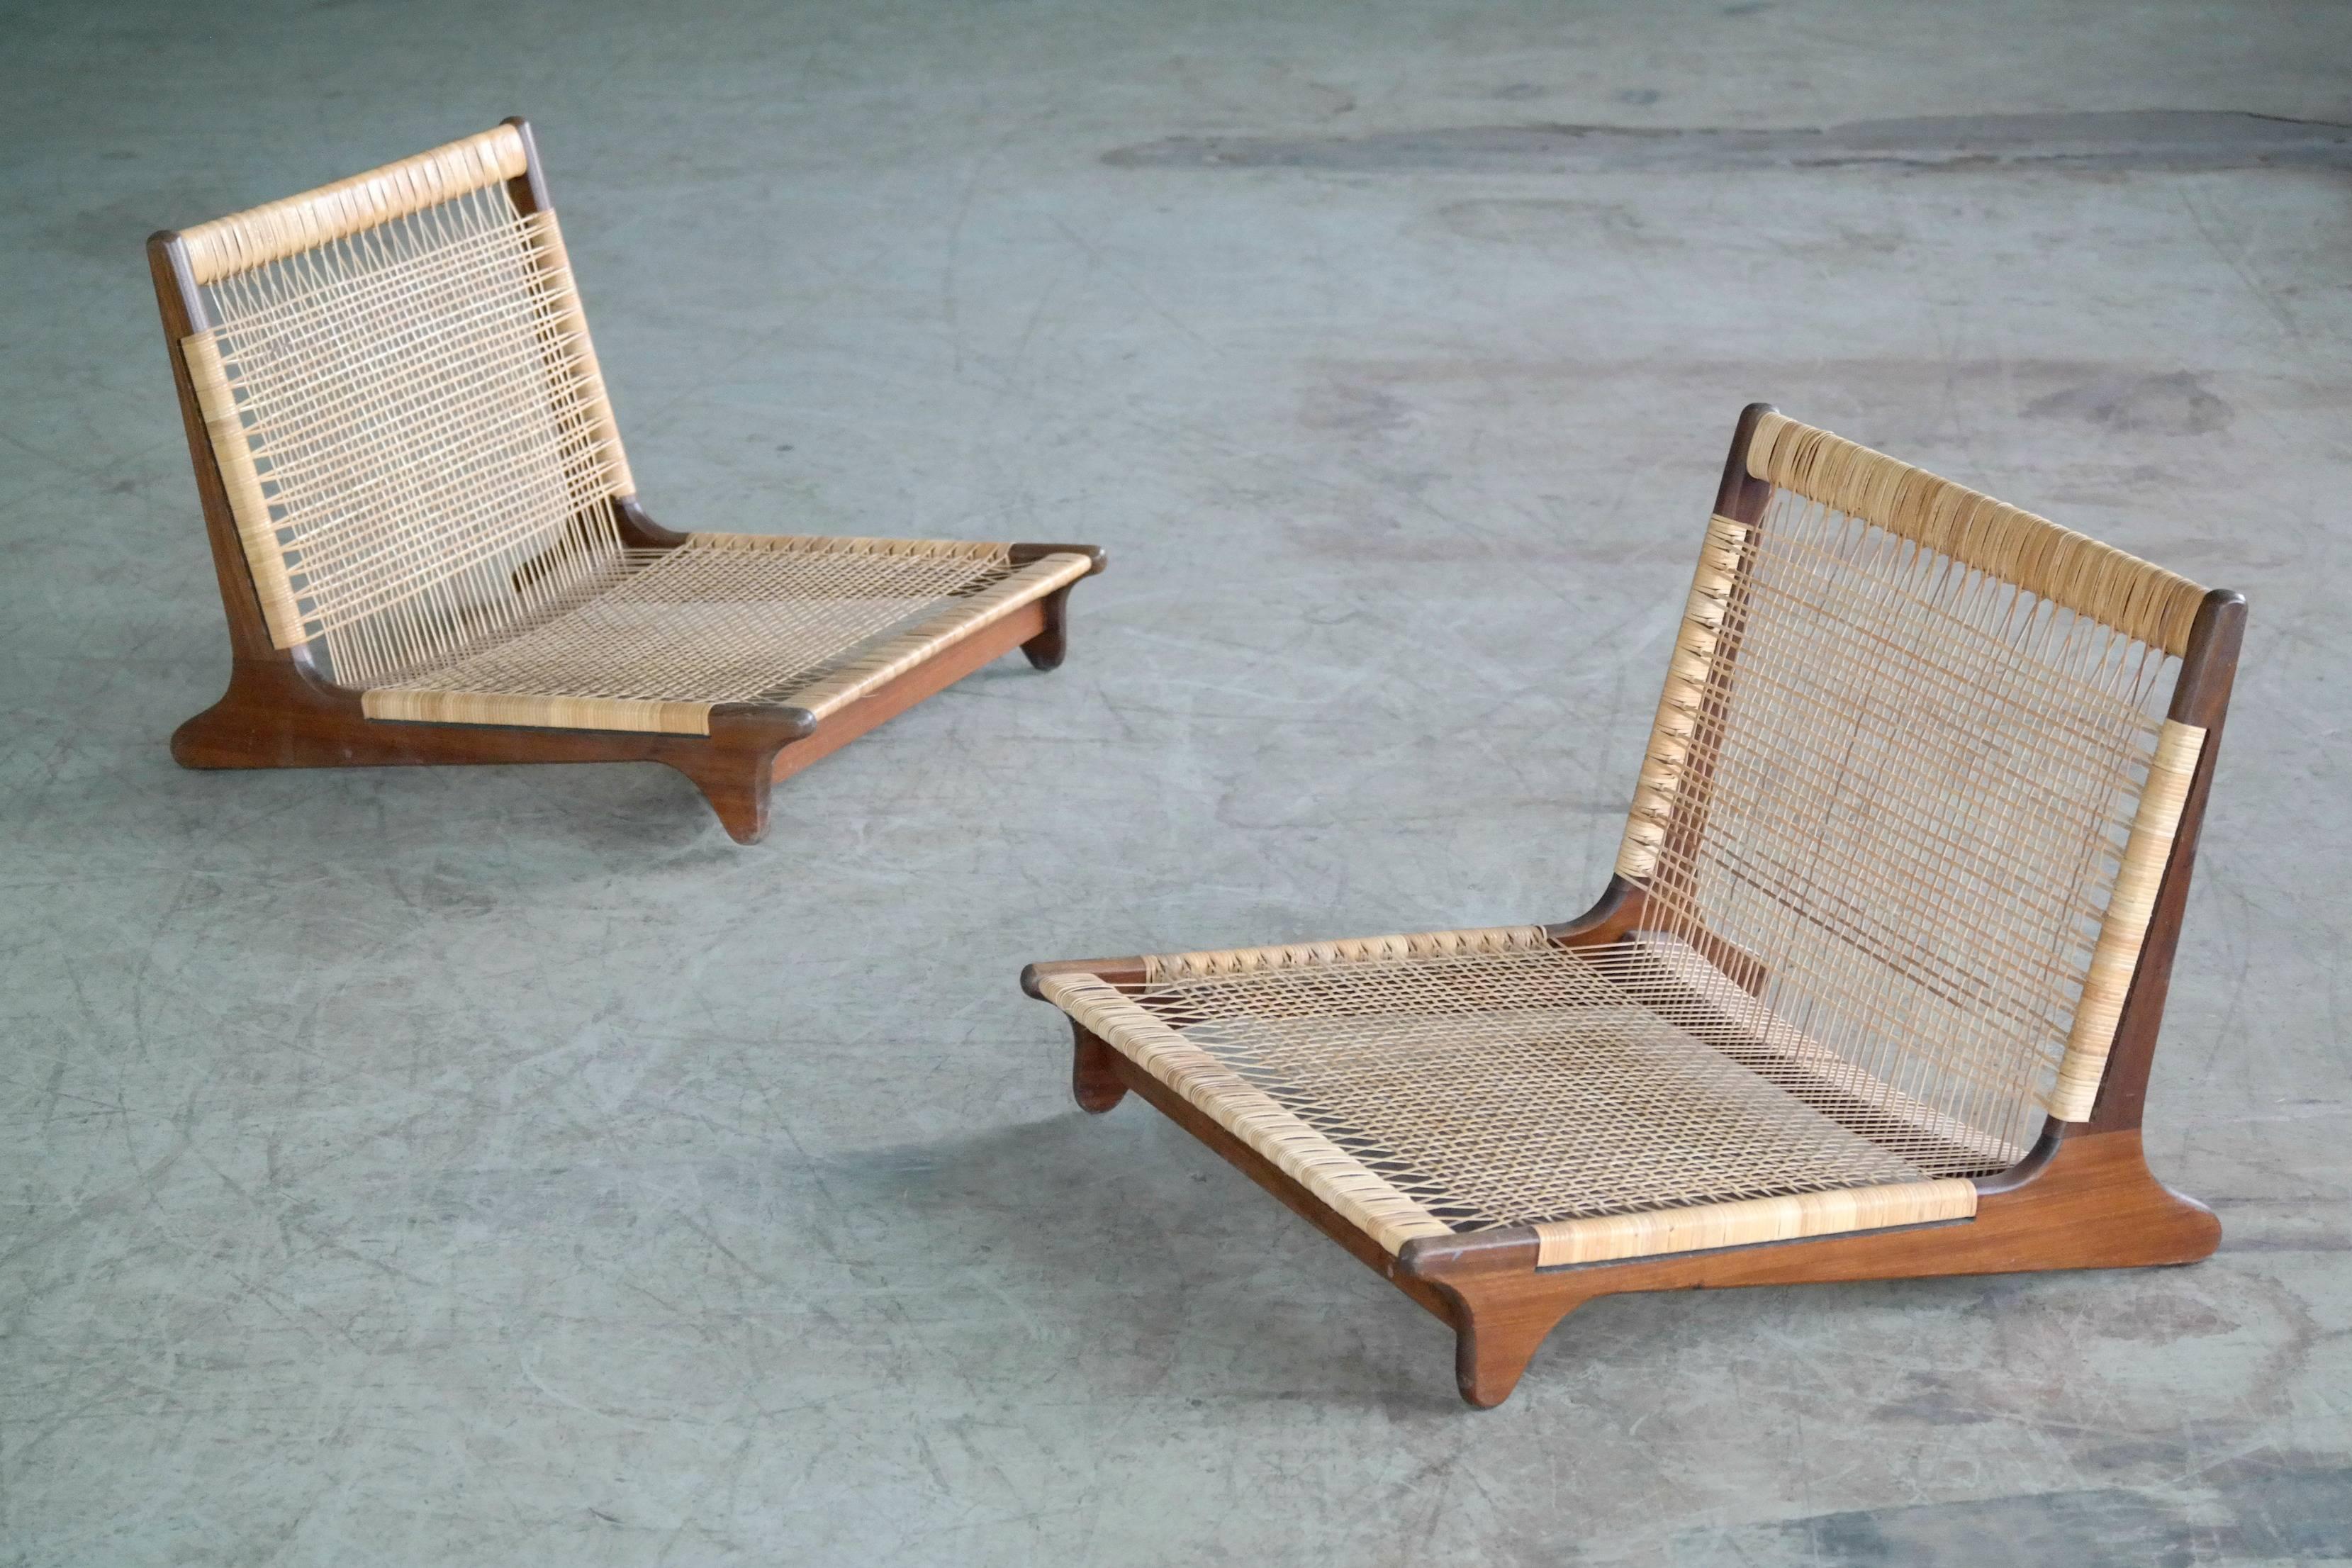 Fantastic pair of Hans Olsen designed modular chair in the style of Japanese tatami dining chairs. Designed in 1957 as part of a modular furniture system for Bramin Mobler where the chairs and tables could be placed in either a bench or on the